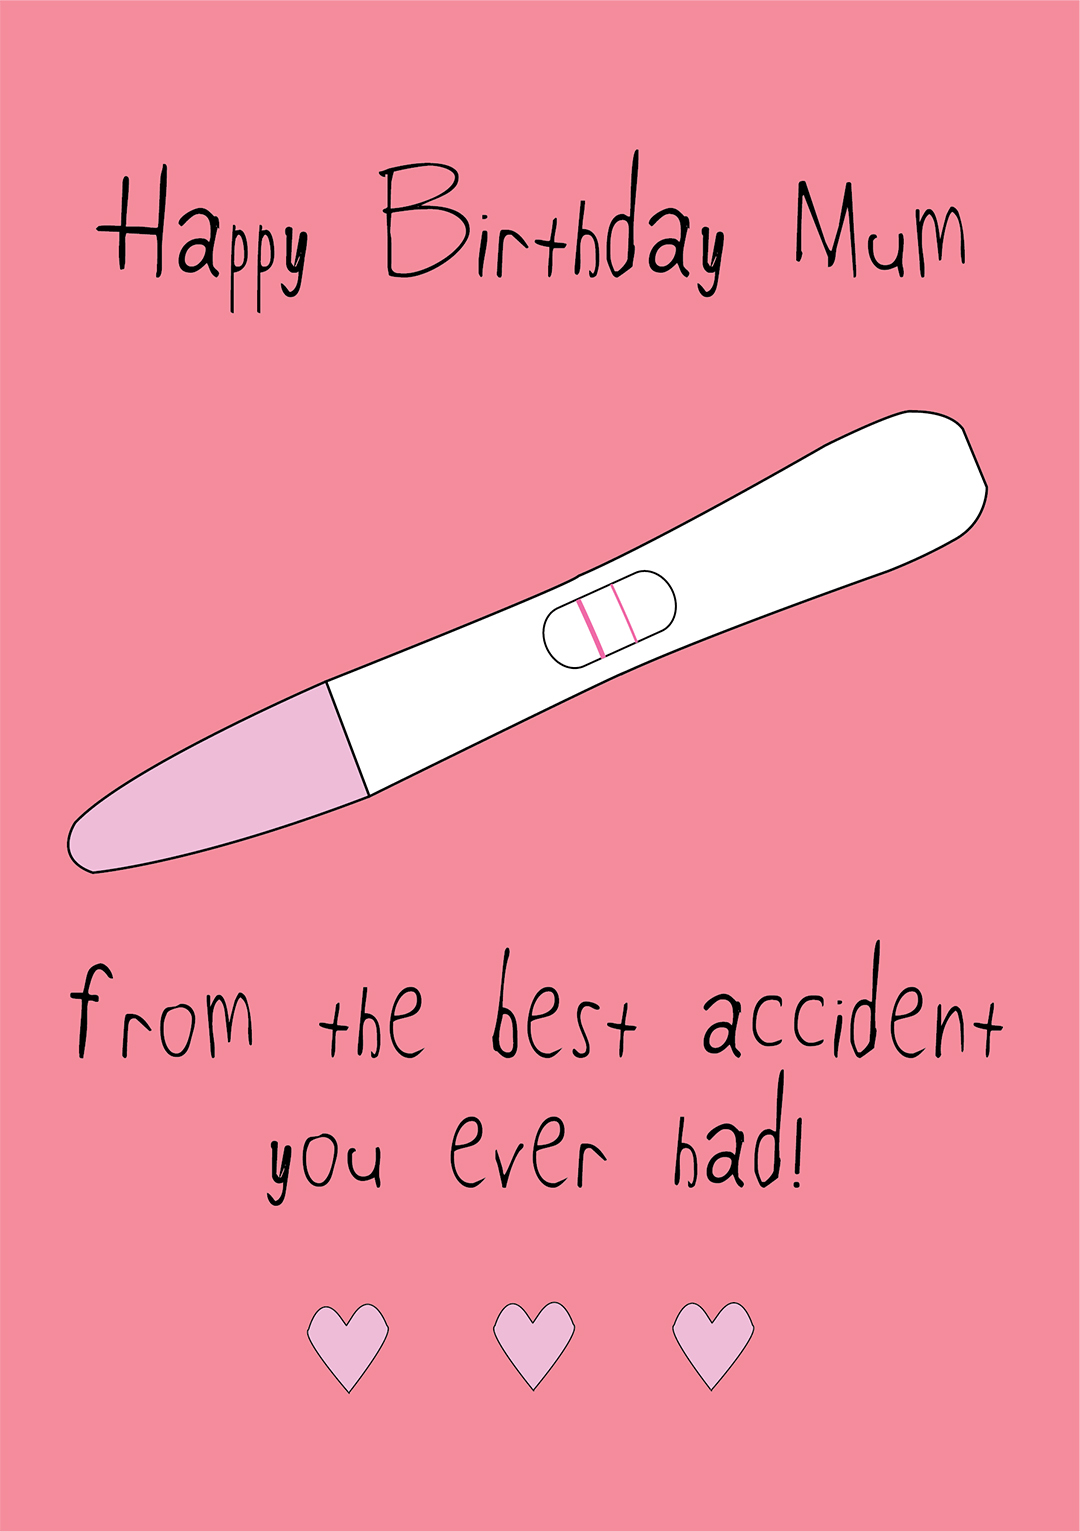 Happy Birthday Mum - From The Best Accident You Ever Had